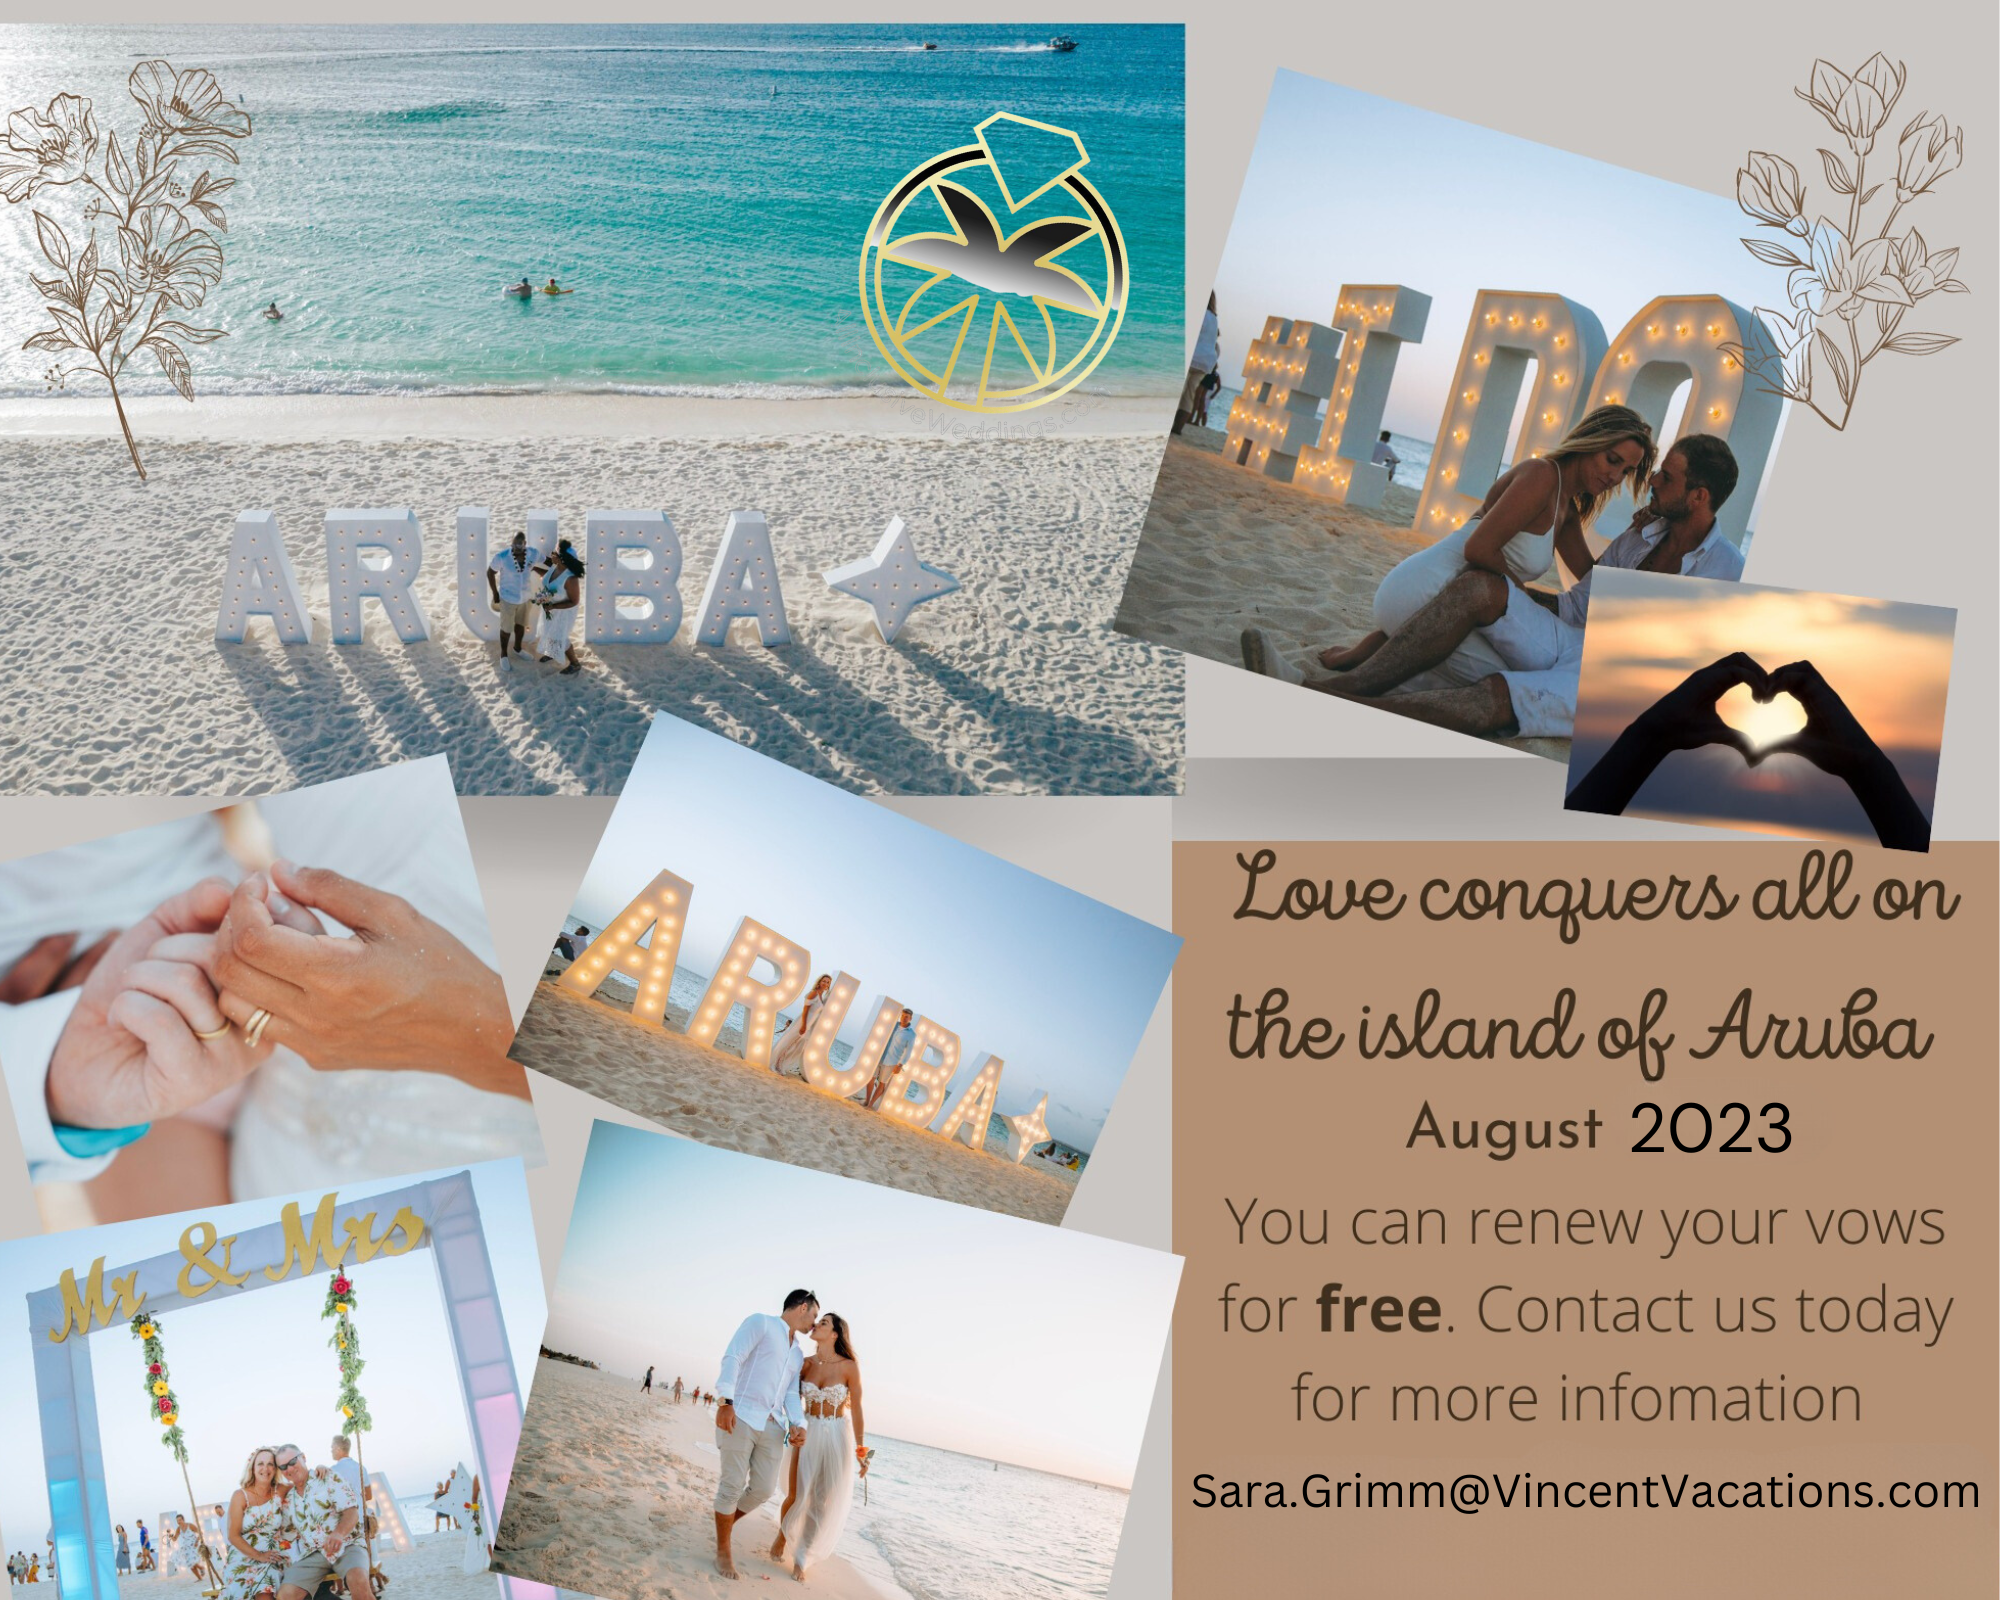 Love conquers all on the island of Aruba! Renew your vows for FREE.